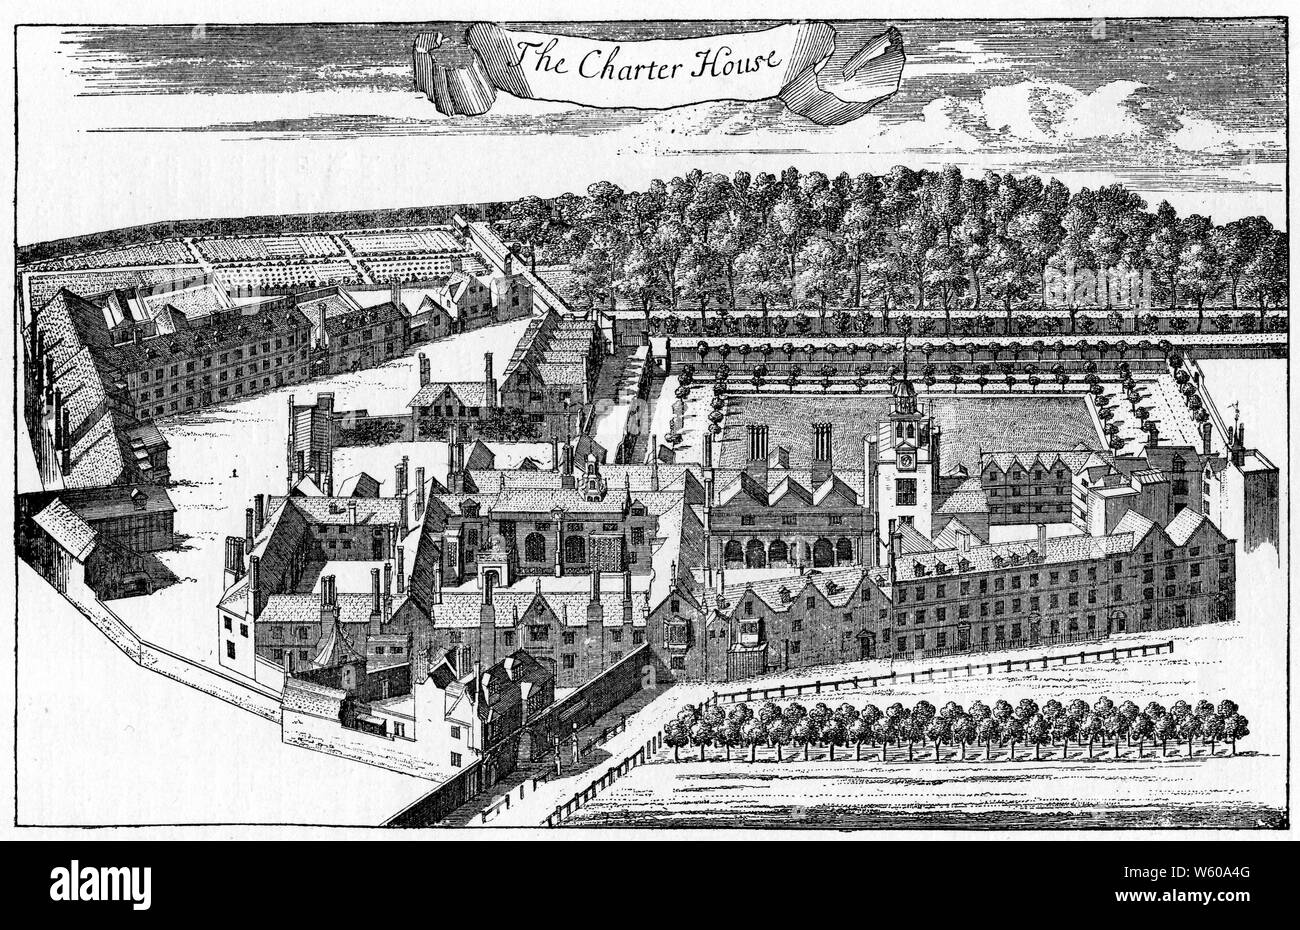 The Charterhouse, London, 1739. After William Henry Toms (c1700-1765). The London Charterhouse is a complex of buildings in Smithfield, London, dating back to the 14th century. It occupies land to the north of Charterhouse Square, and is within the Borough of Islington. Stock Photo